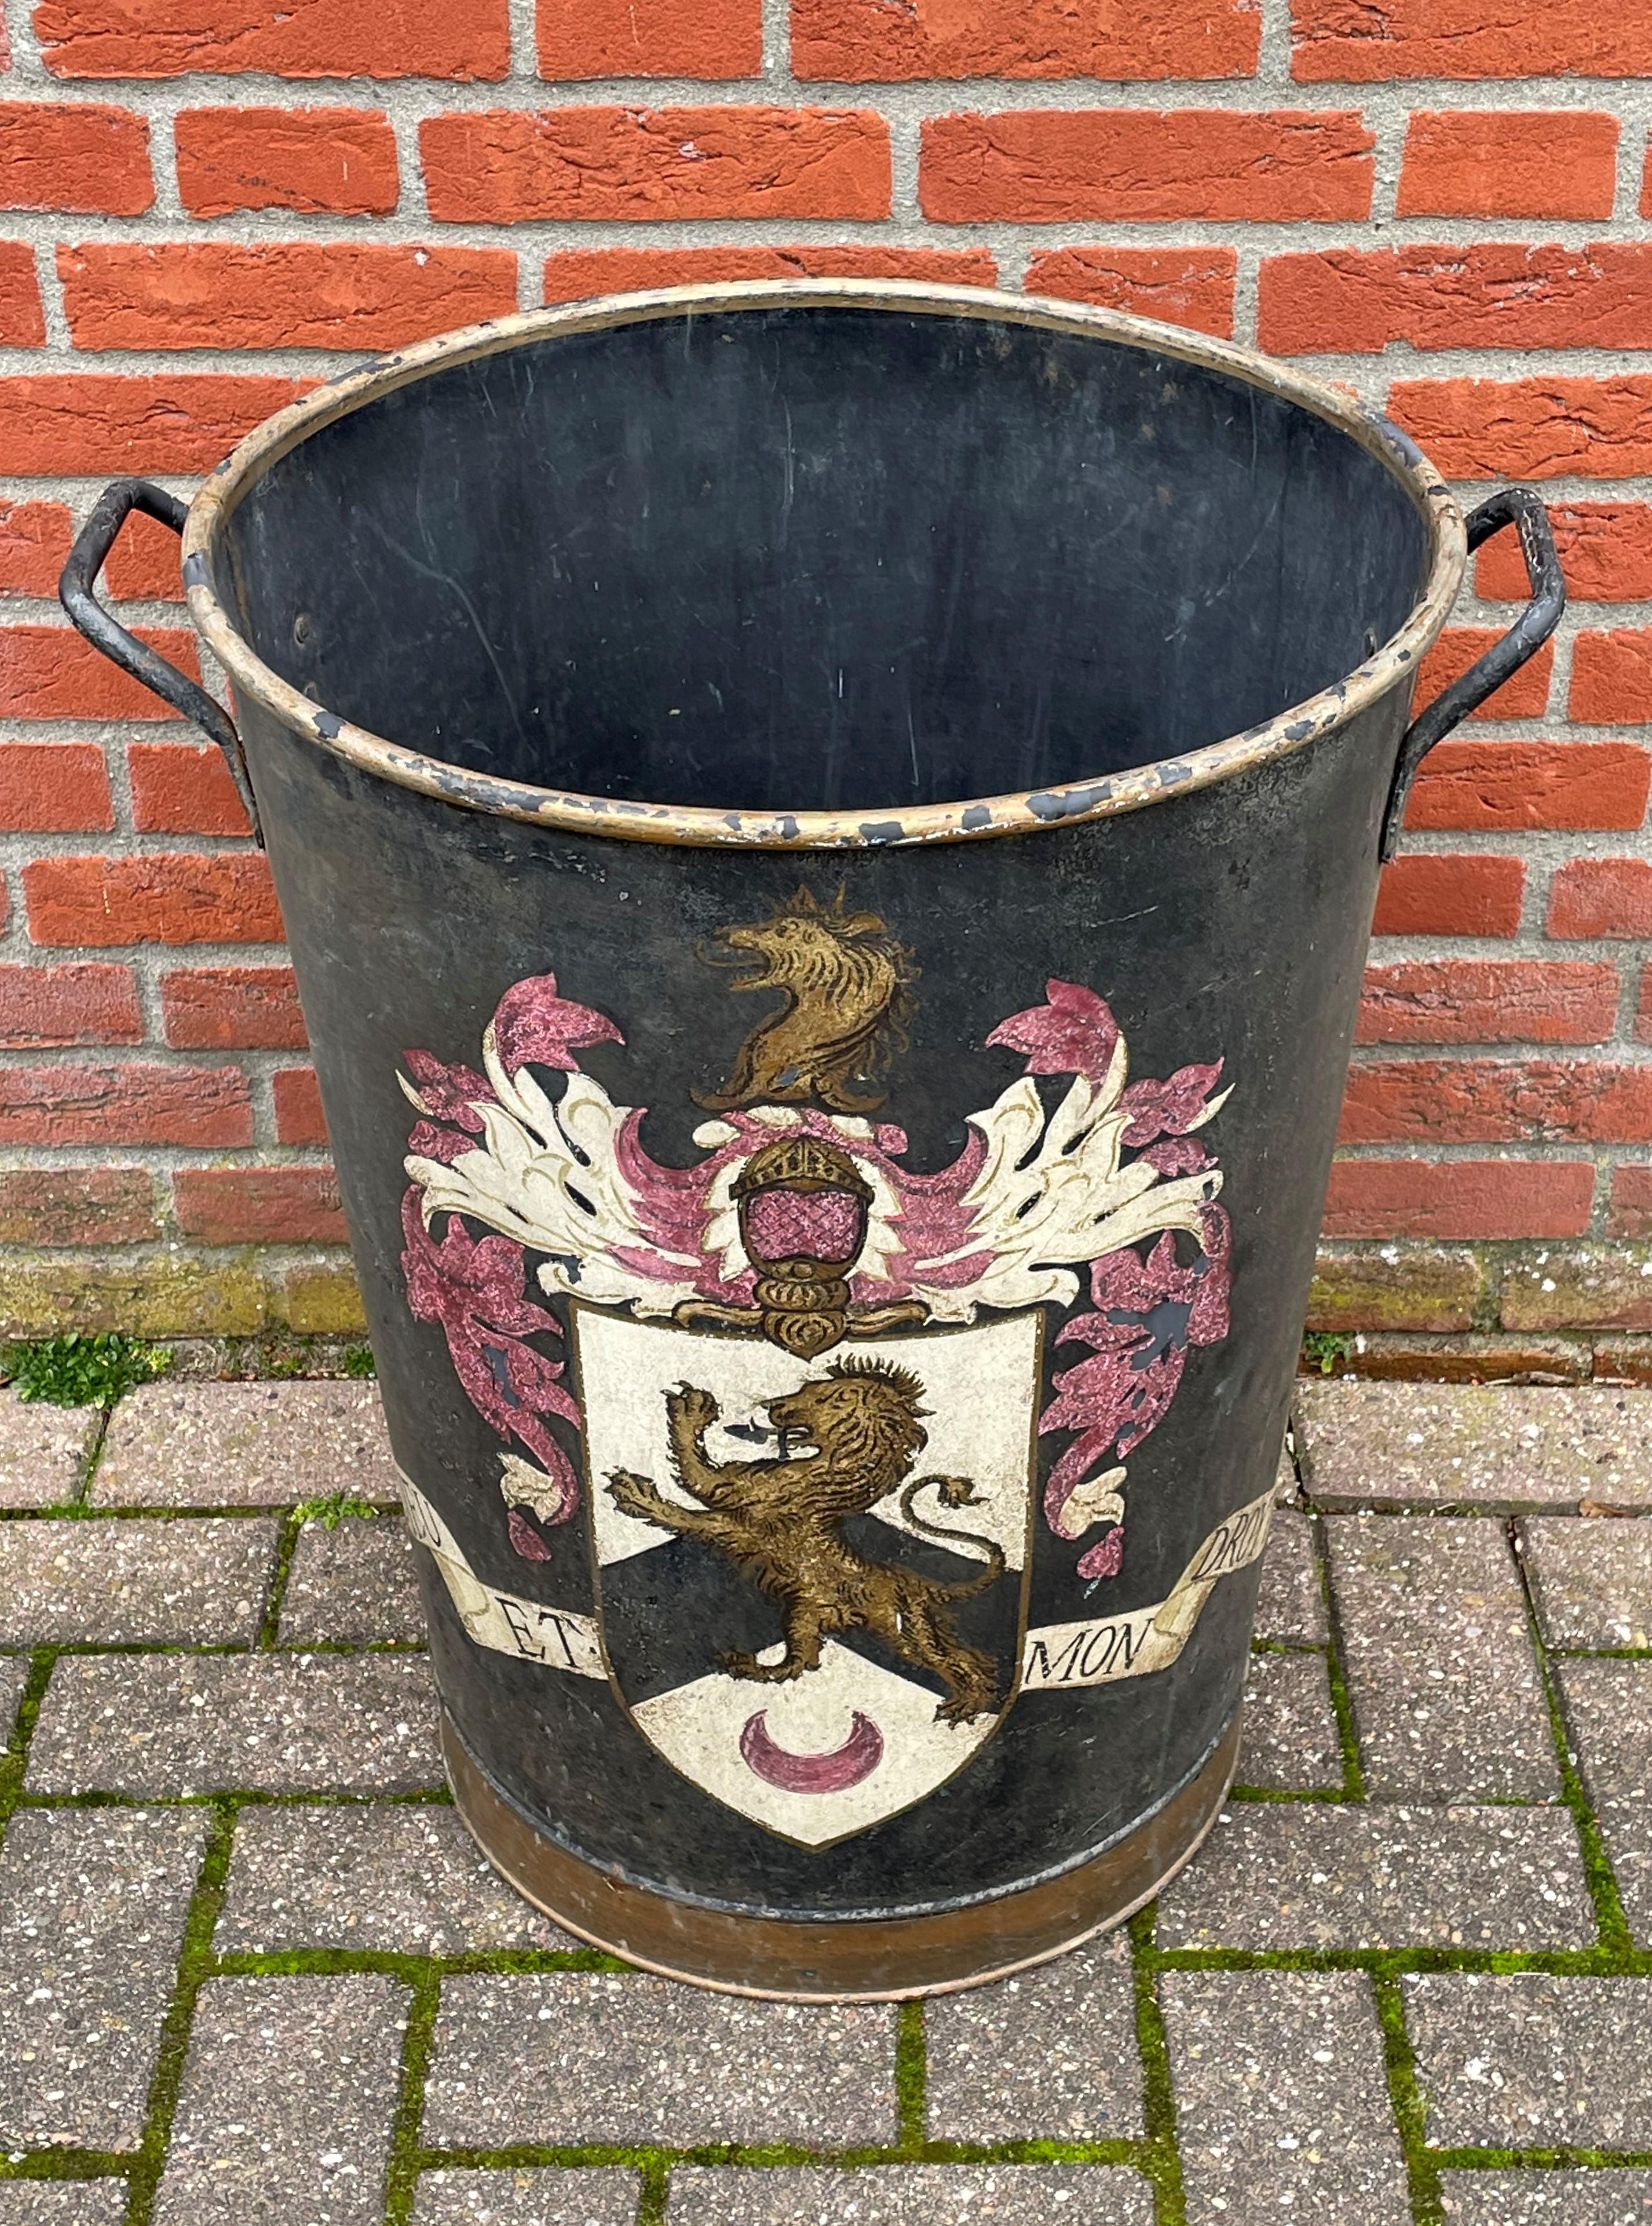 Country Largest Antique Firewood Bucket / Planter with British Crest 'God and My Right'